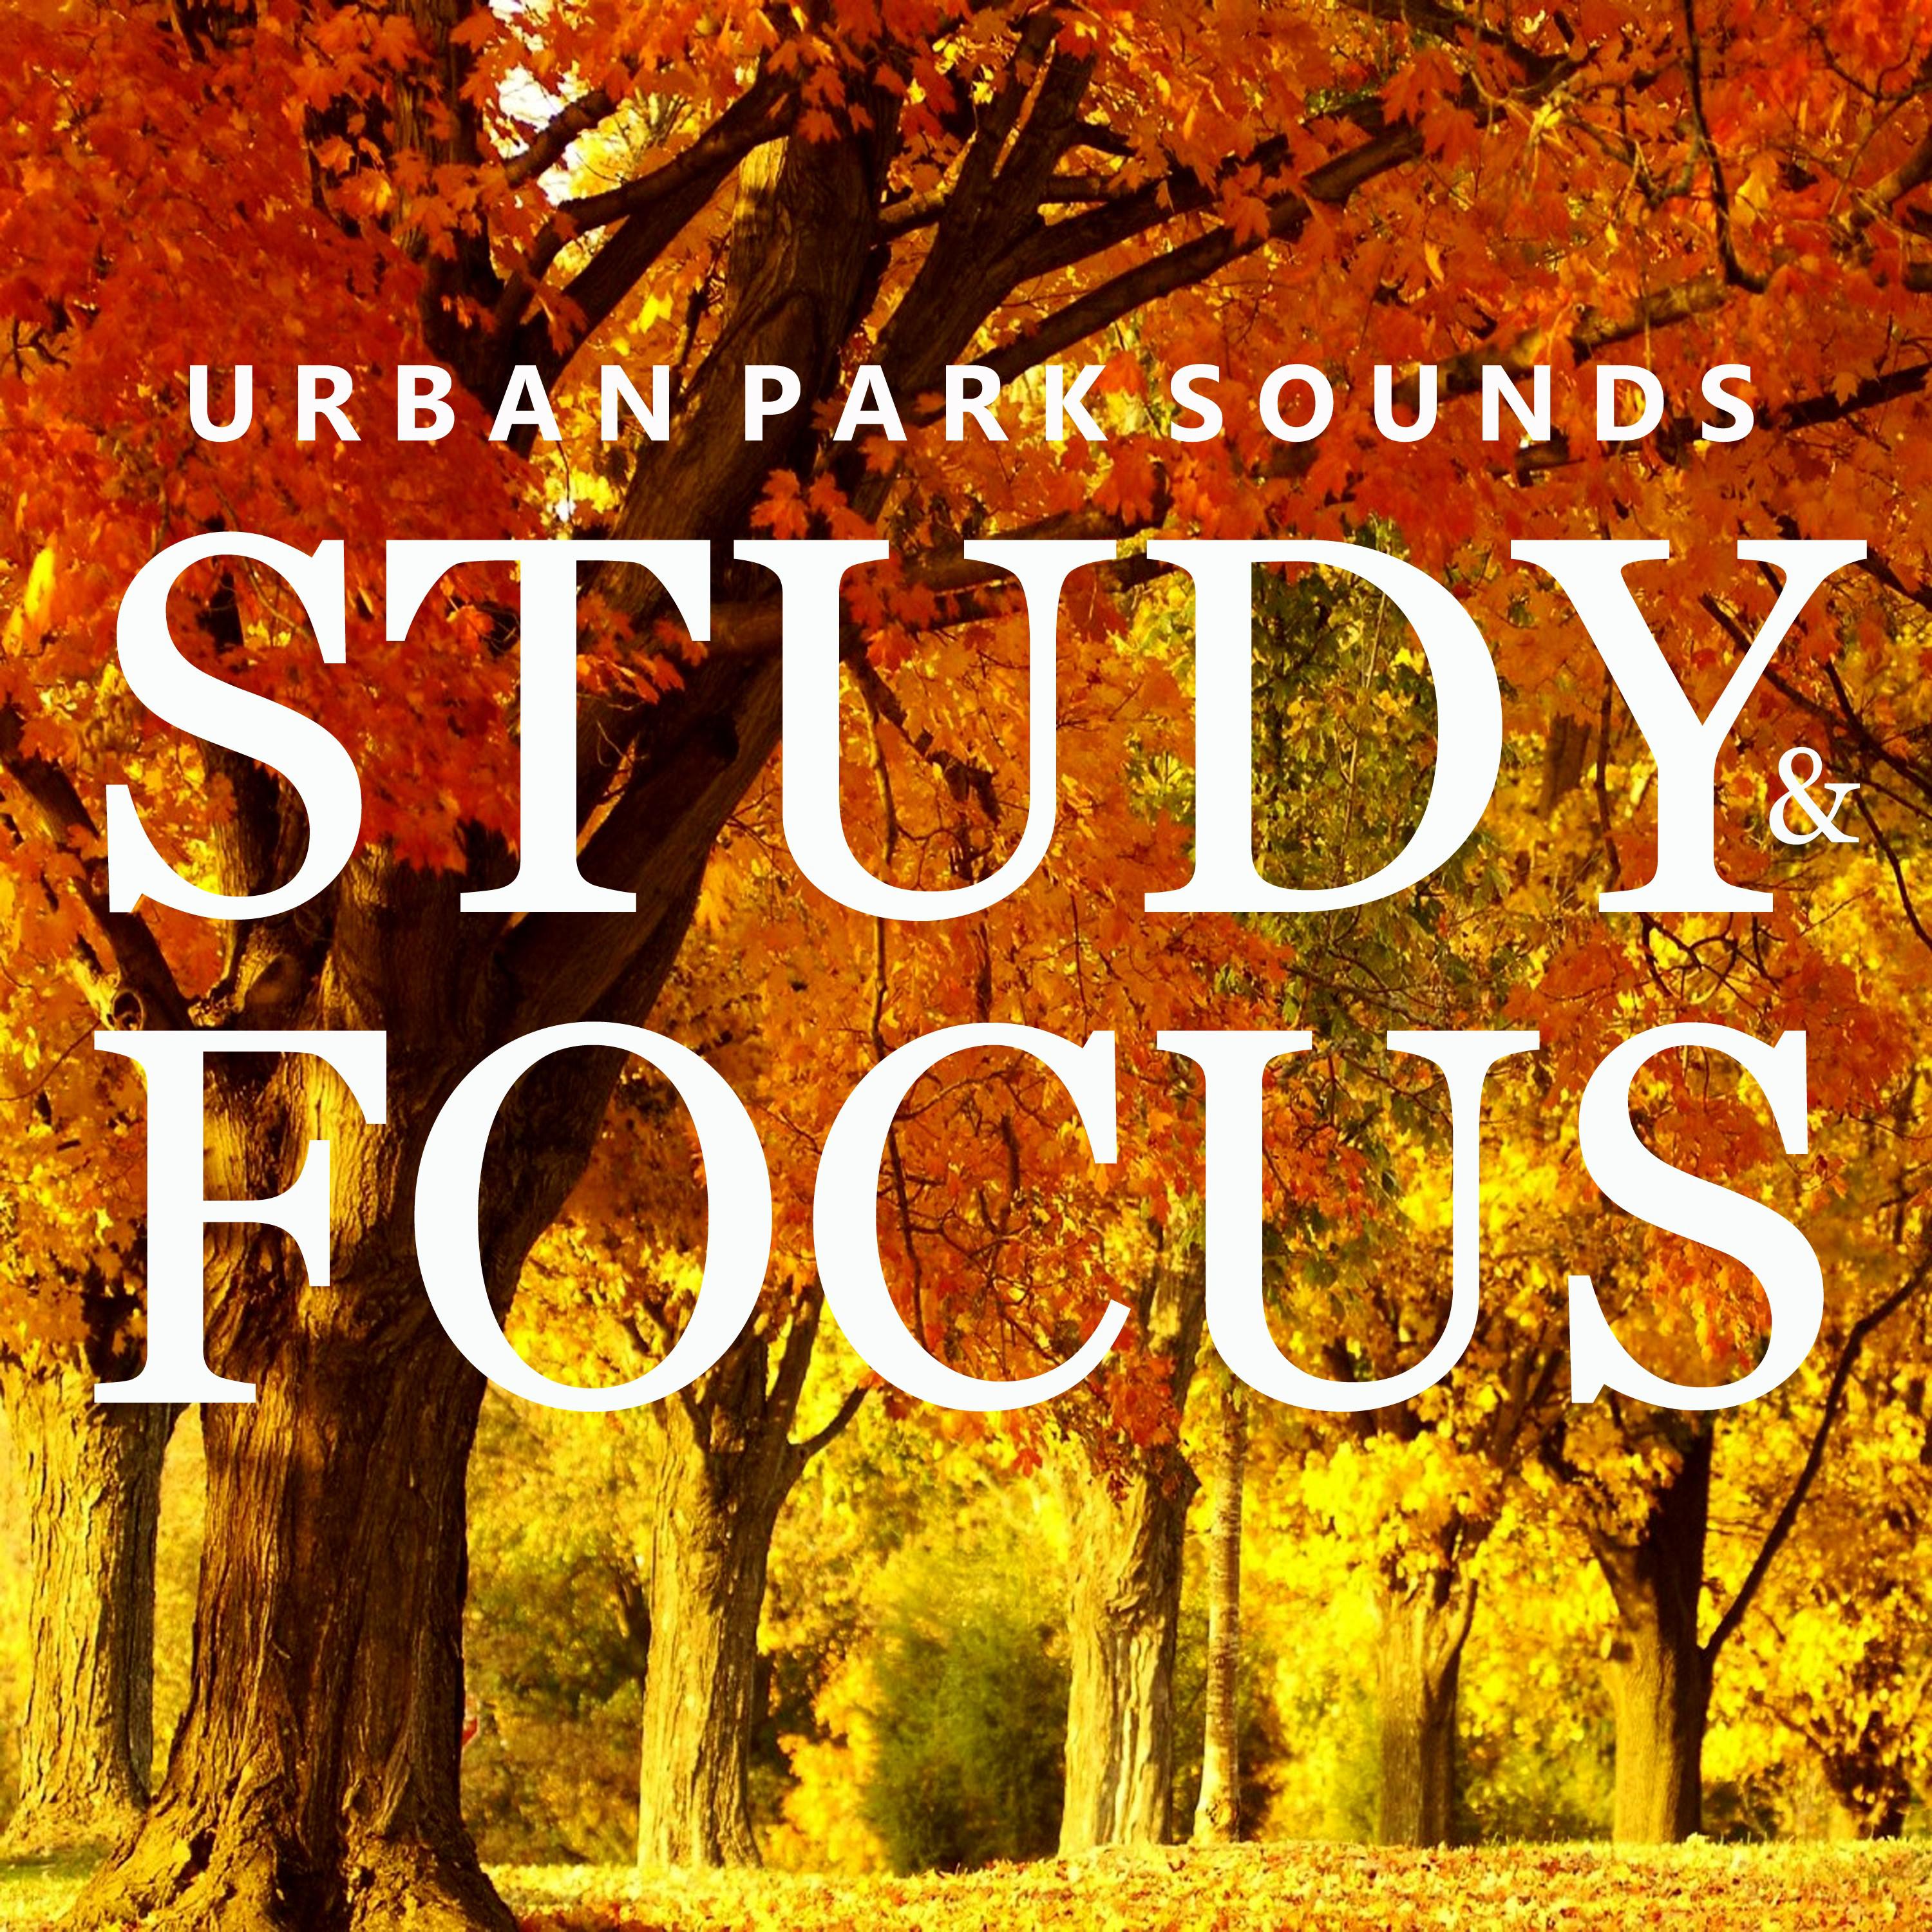 Urban Park Sounds for Studying, Pt. 45